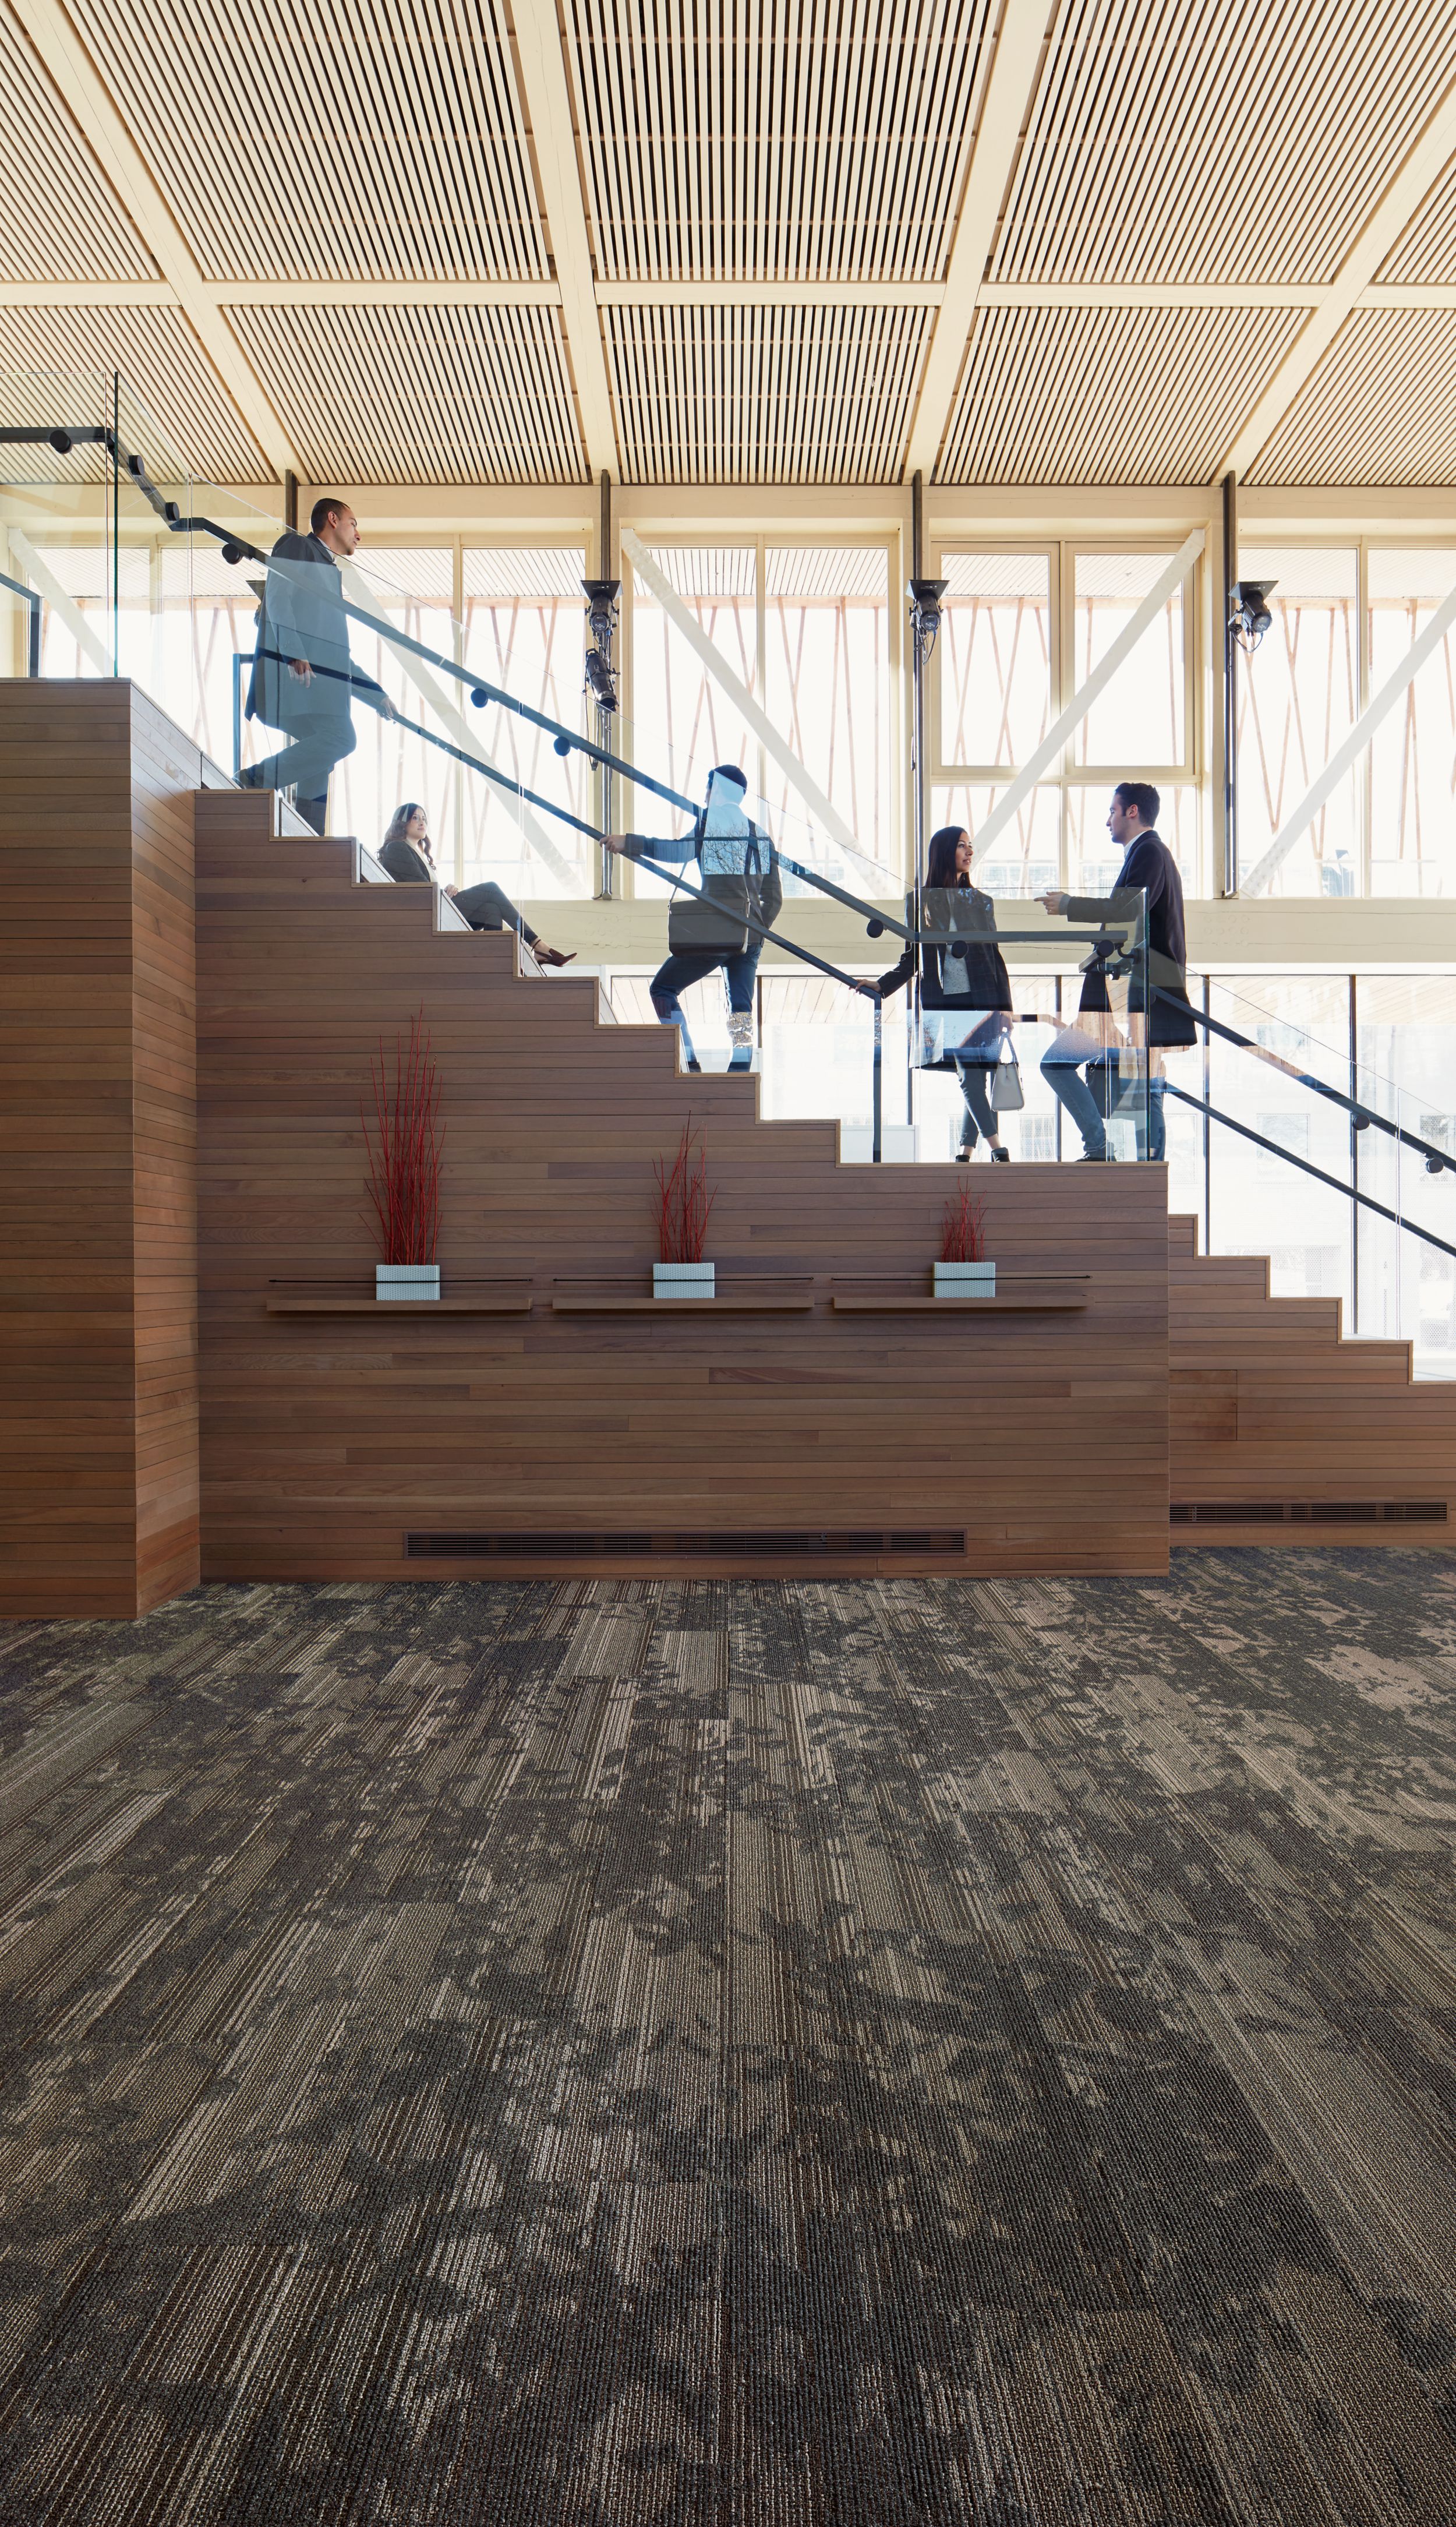 Interface Glazing plank carpet tile with wooden staircase in background numéro d’image 5